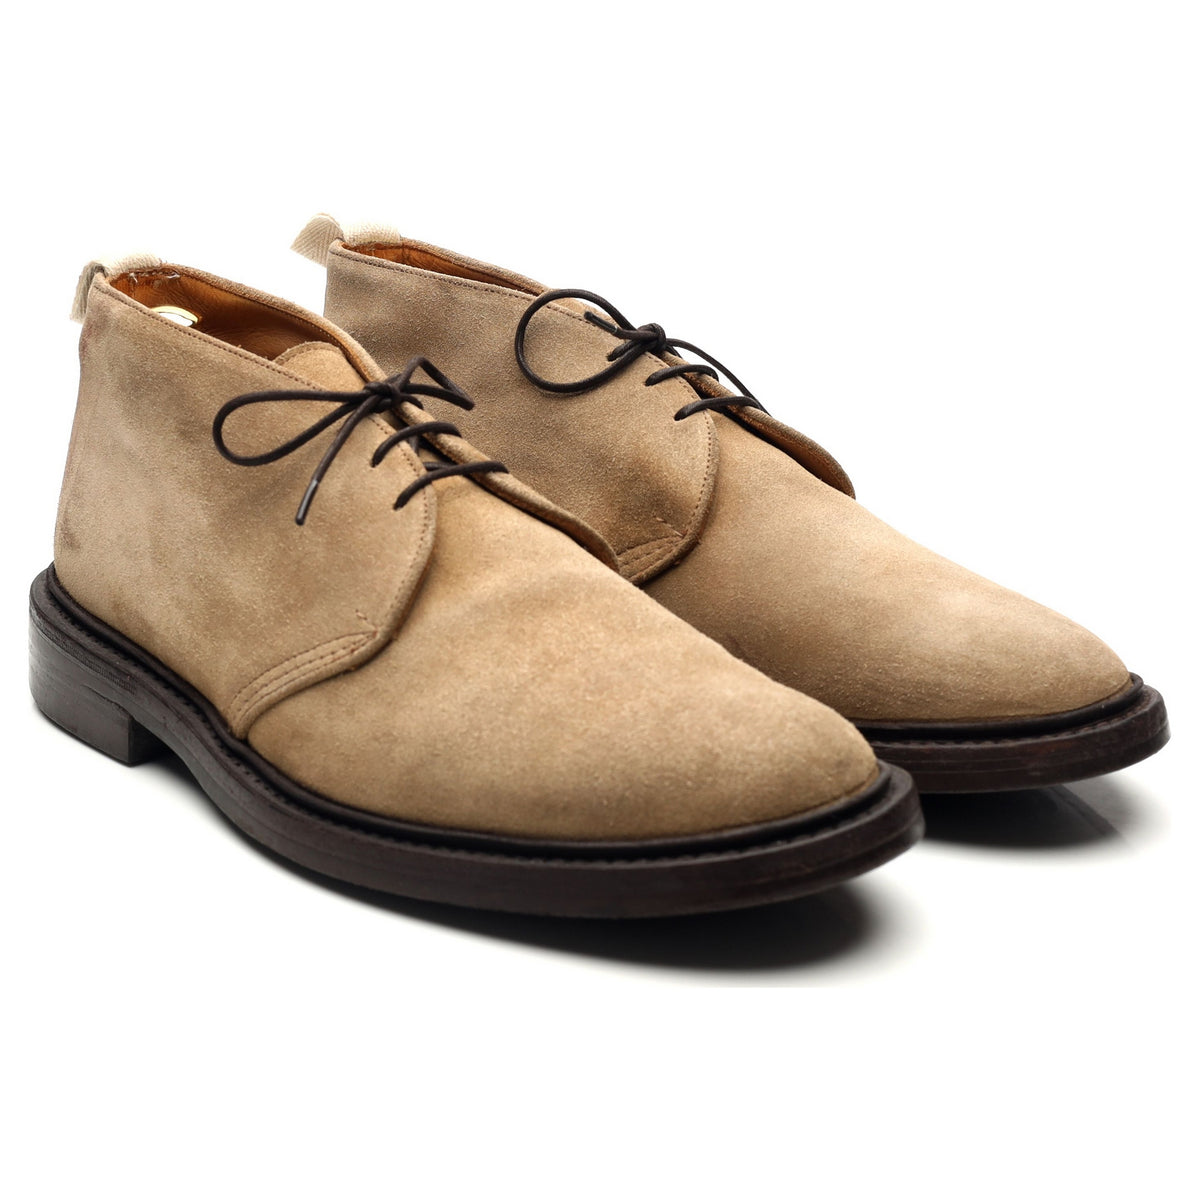 Suede Chukka Boots UK 9 - Abbot's